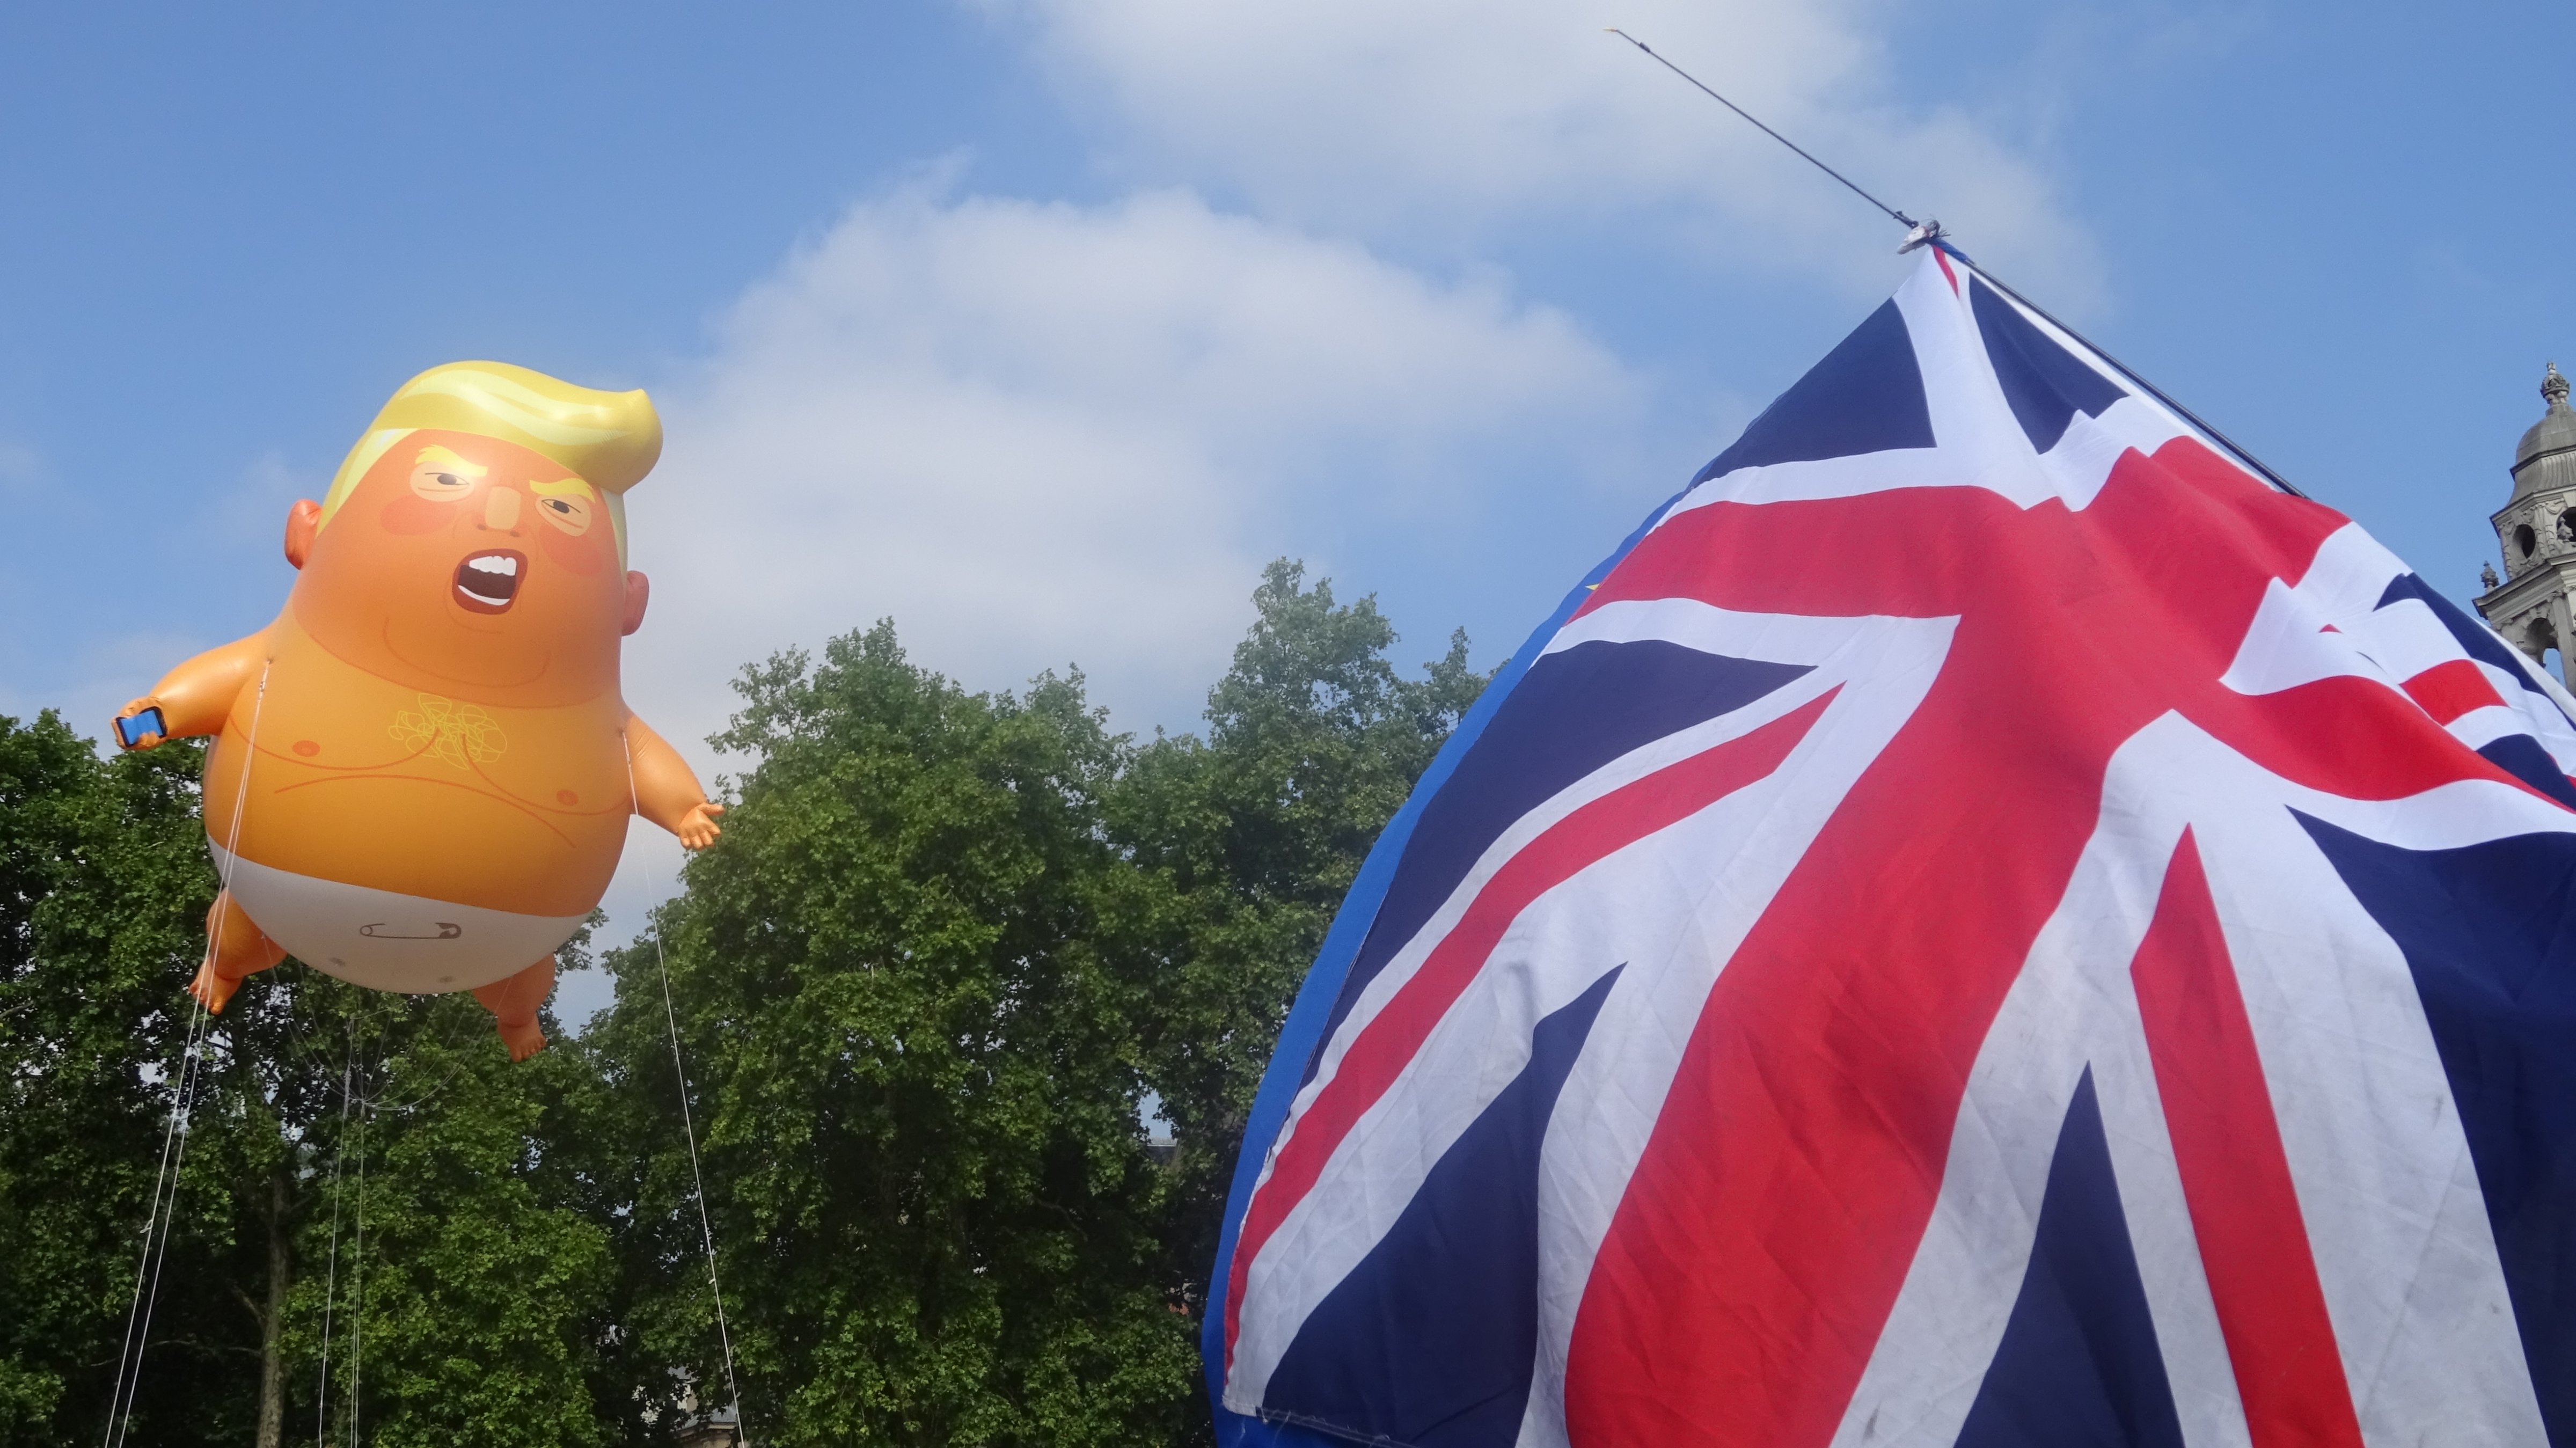 A balloon depicting Trump as an angry orange baby flies in Parliament Square, central London (Billy Perrigo - TIME)